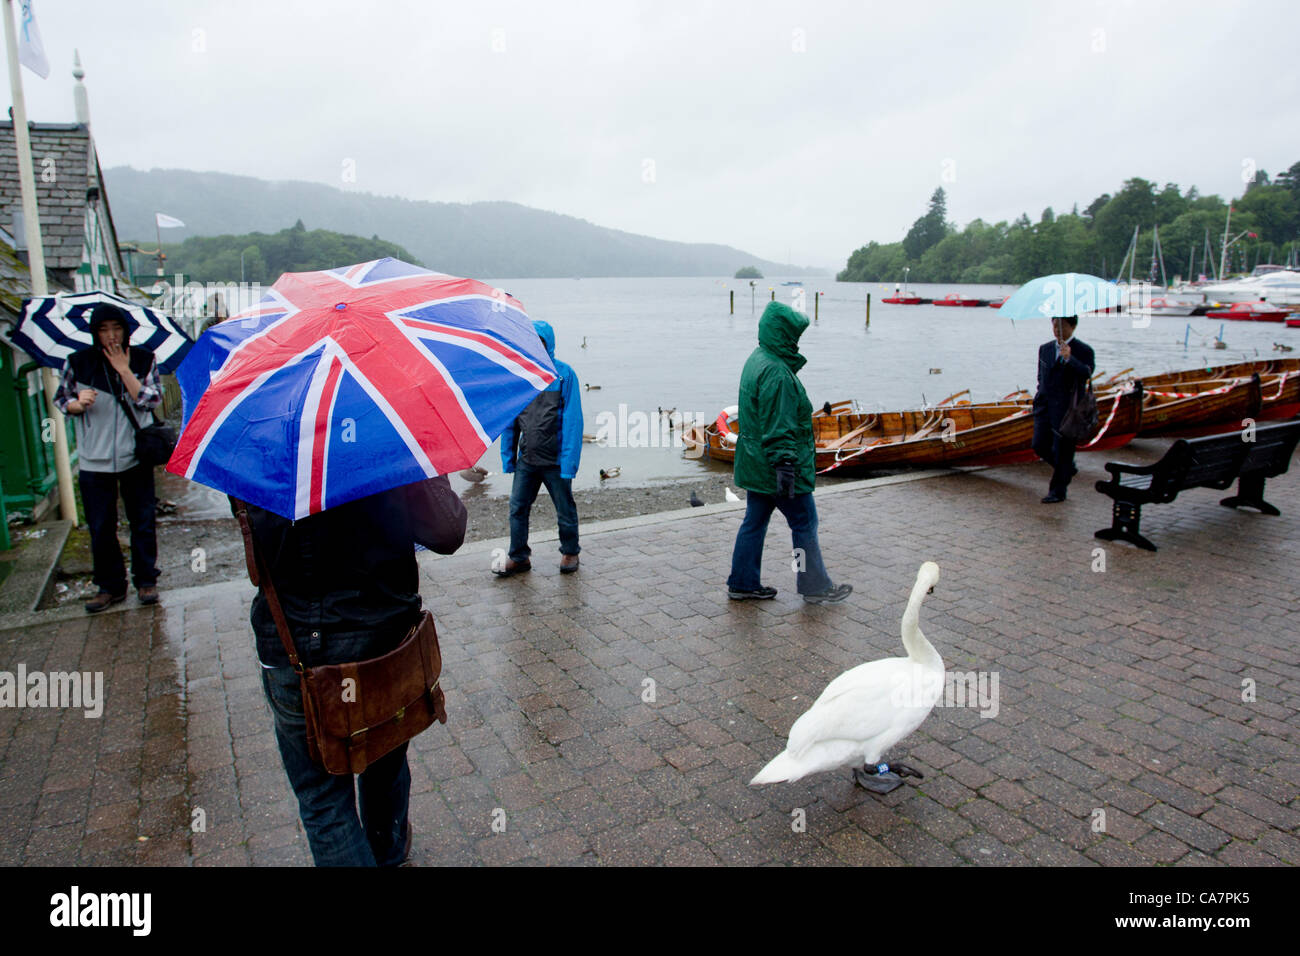 Saturday 23rd June 2012. Windermere, Cumbria, UK. Union Jack umbrella on Bowness Bay front in the rainy English weather. Stock Photo